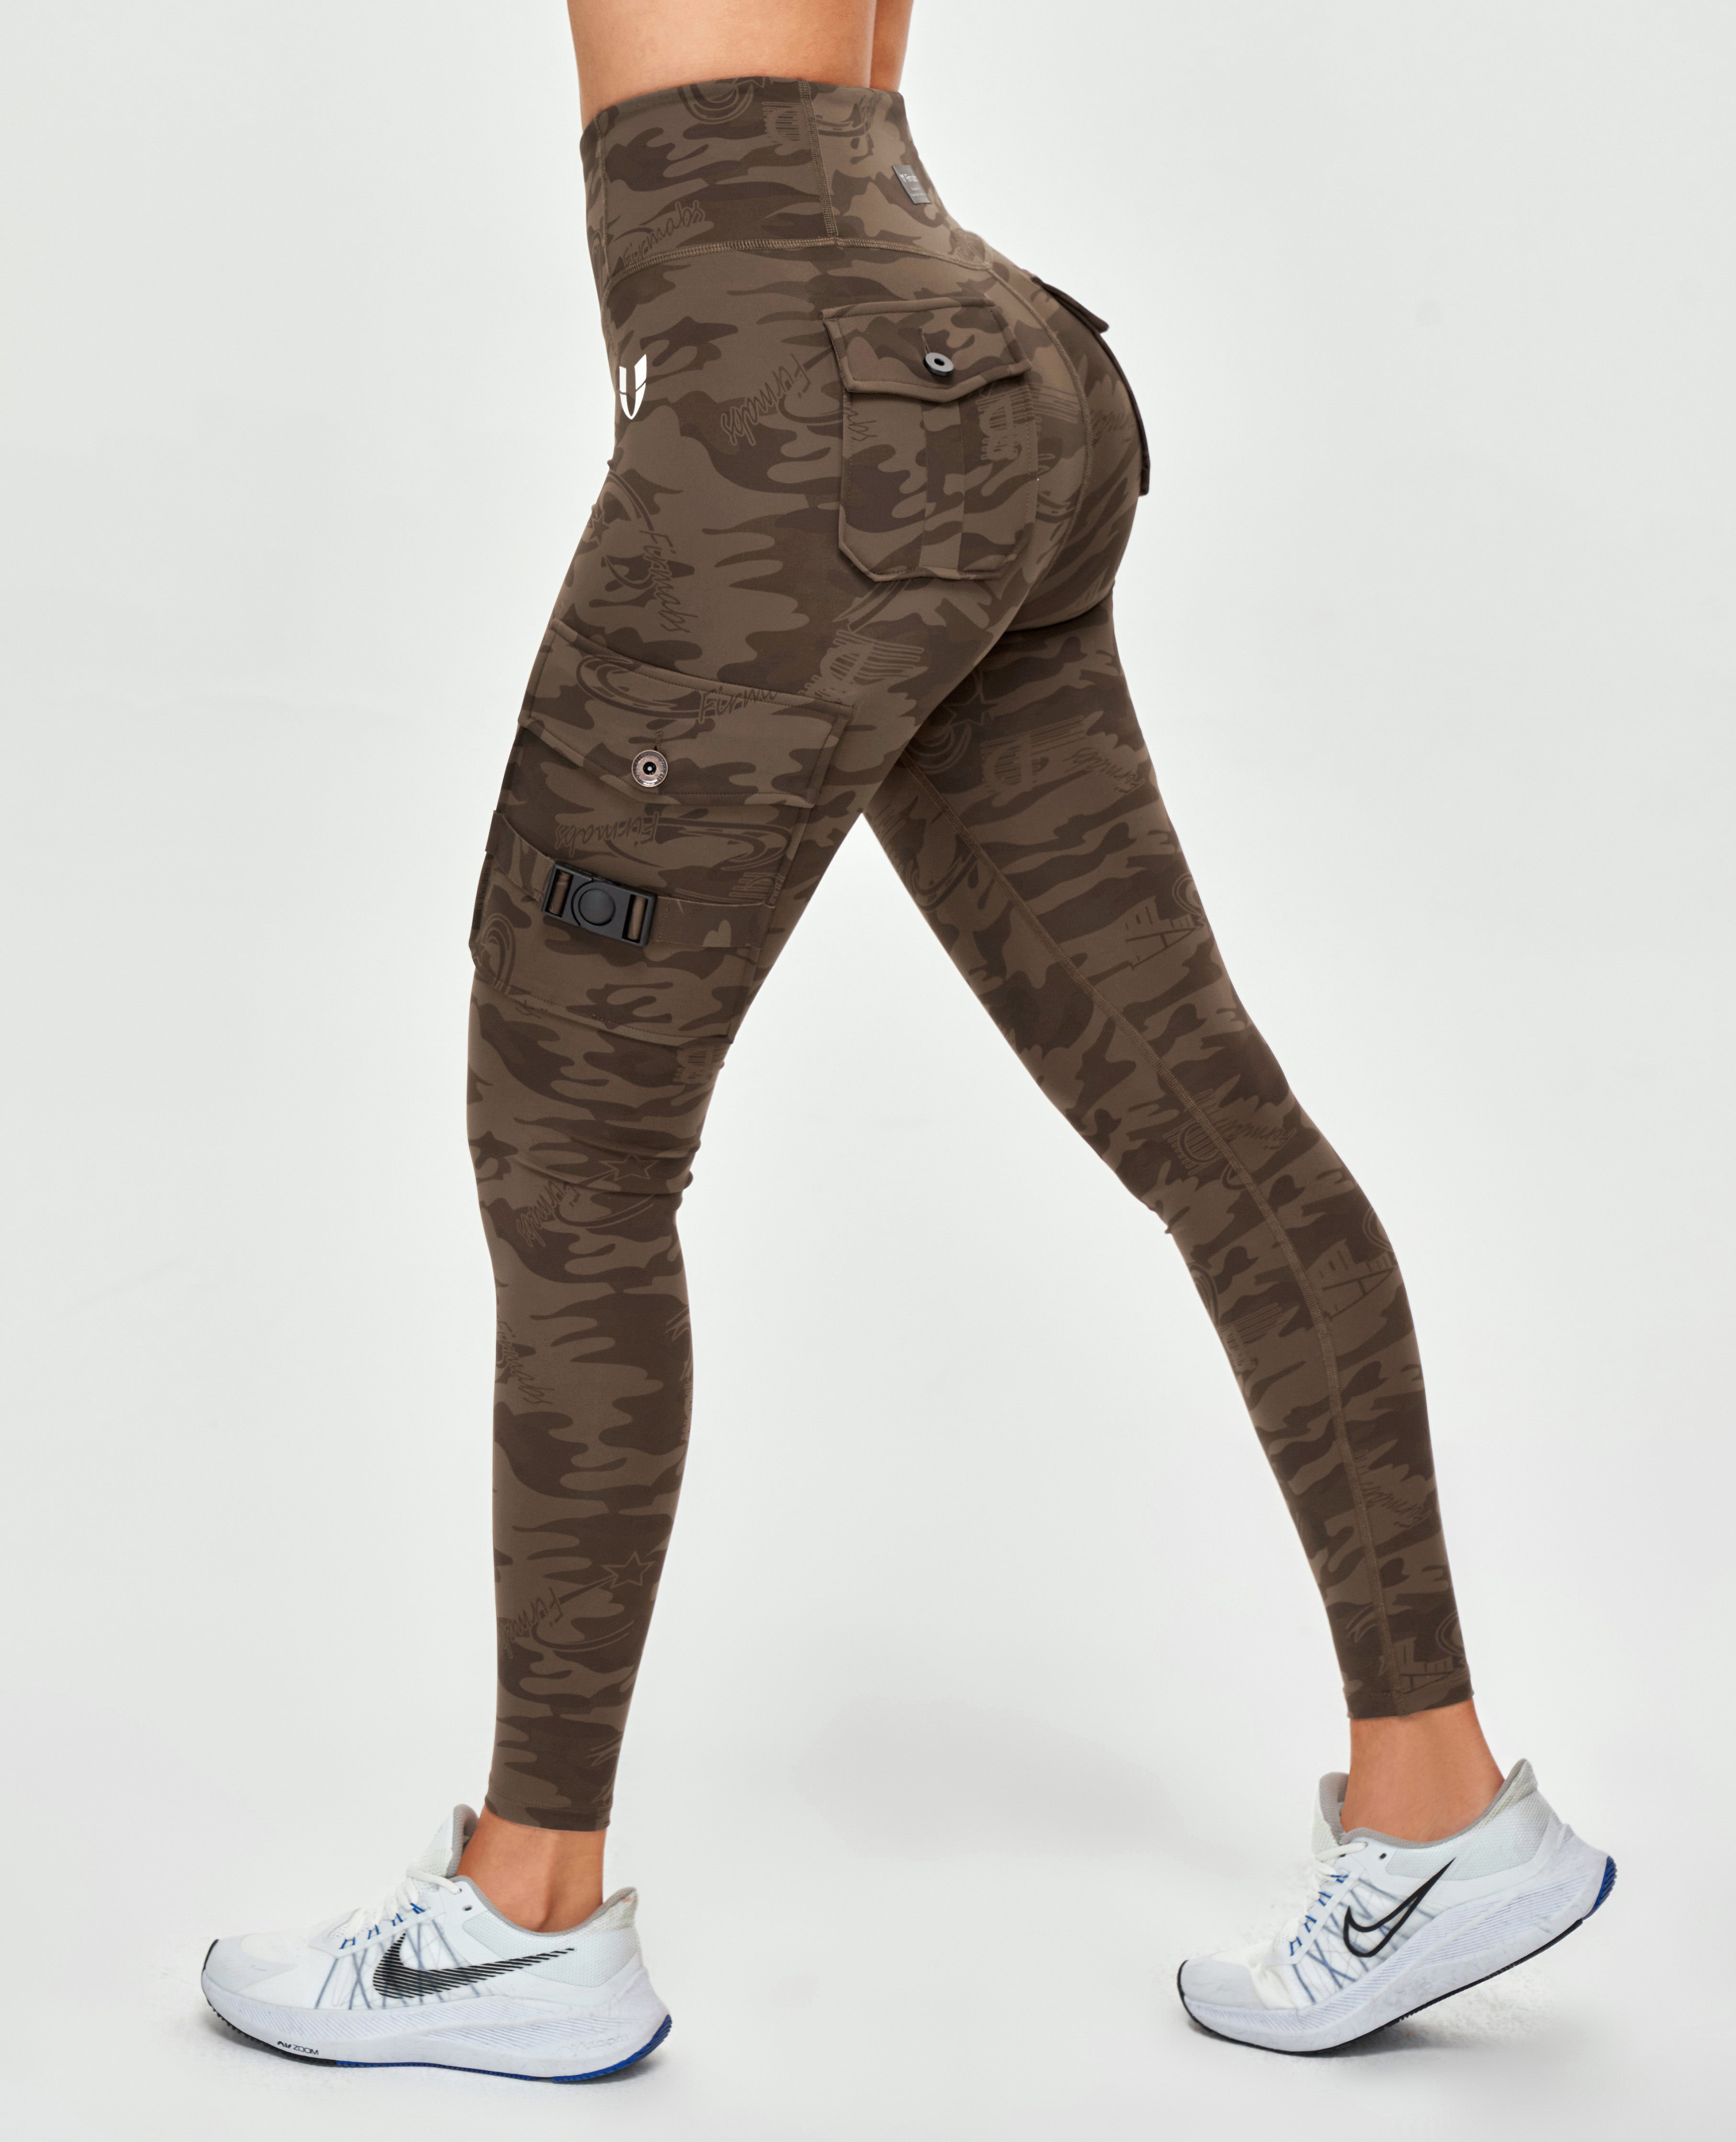 High Waisted Cargo Leggings - Brown, FIRM ABS